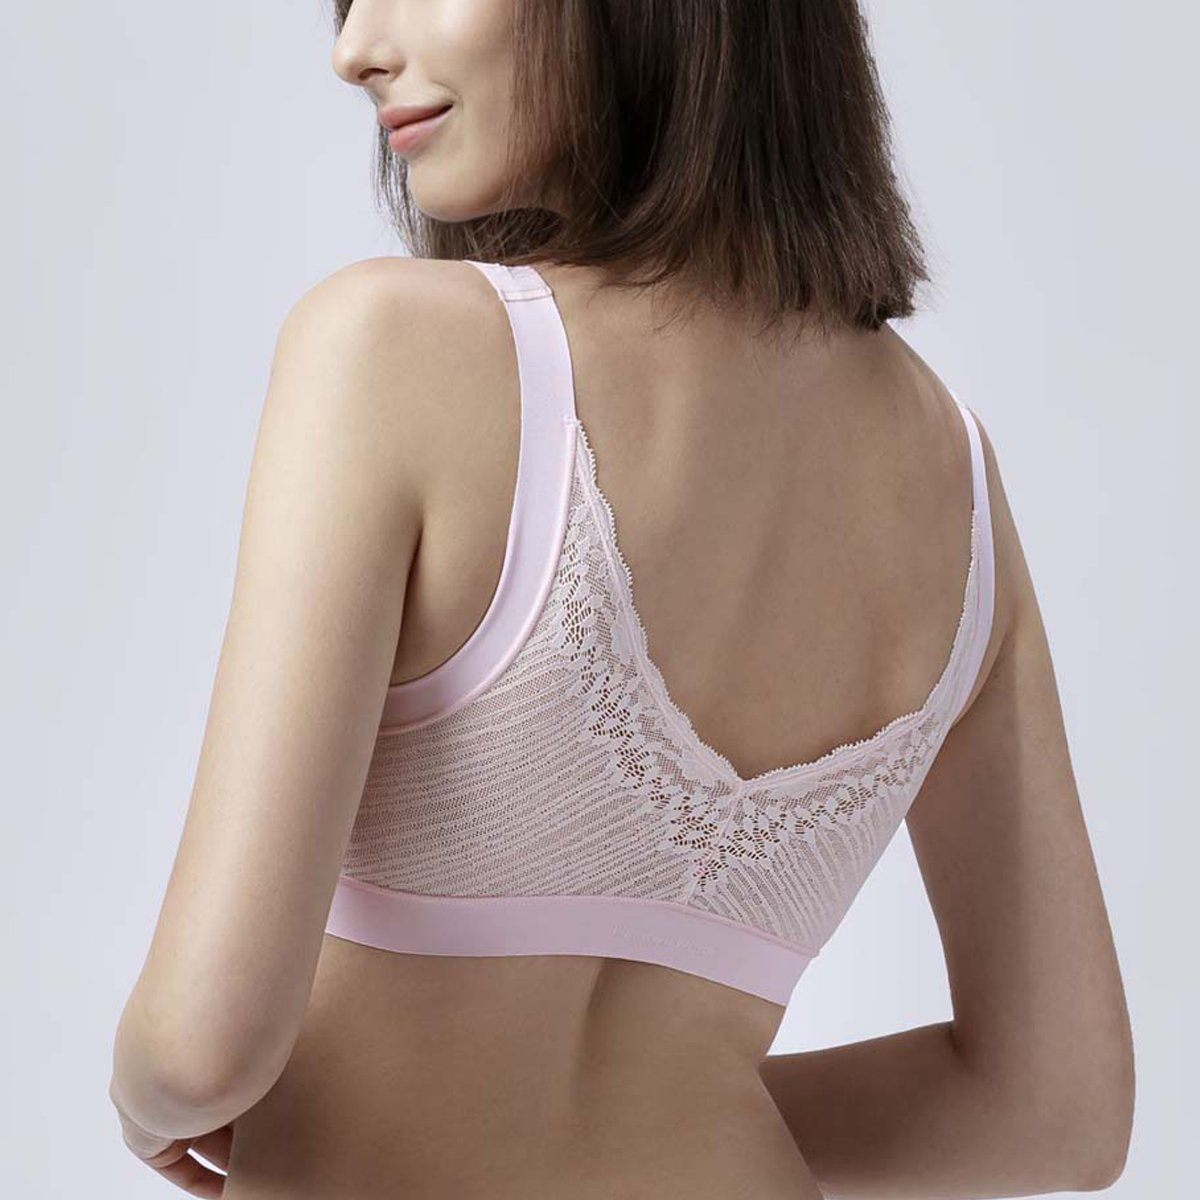 Invisible Fashion Bra Top Bra Her Own Words 